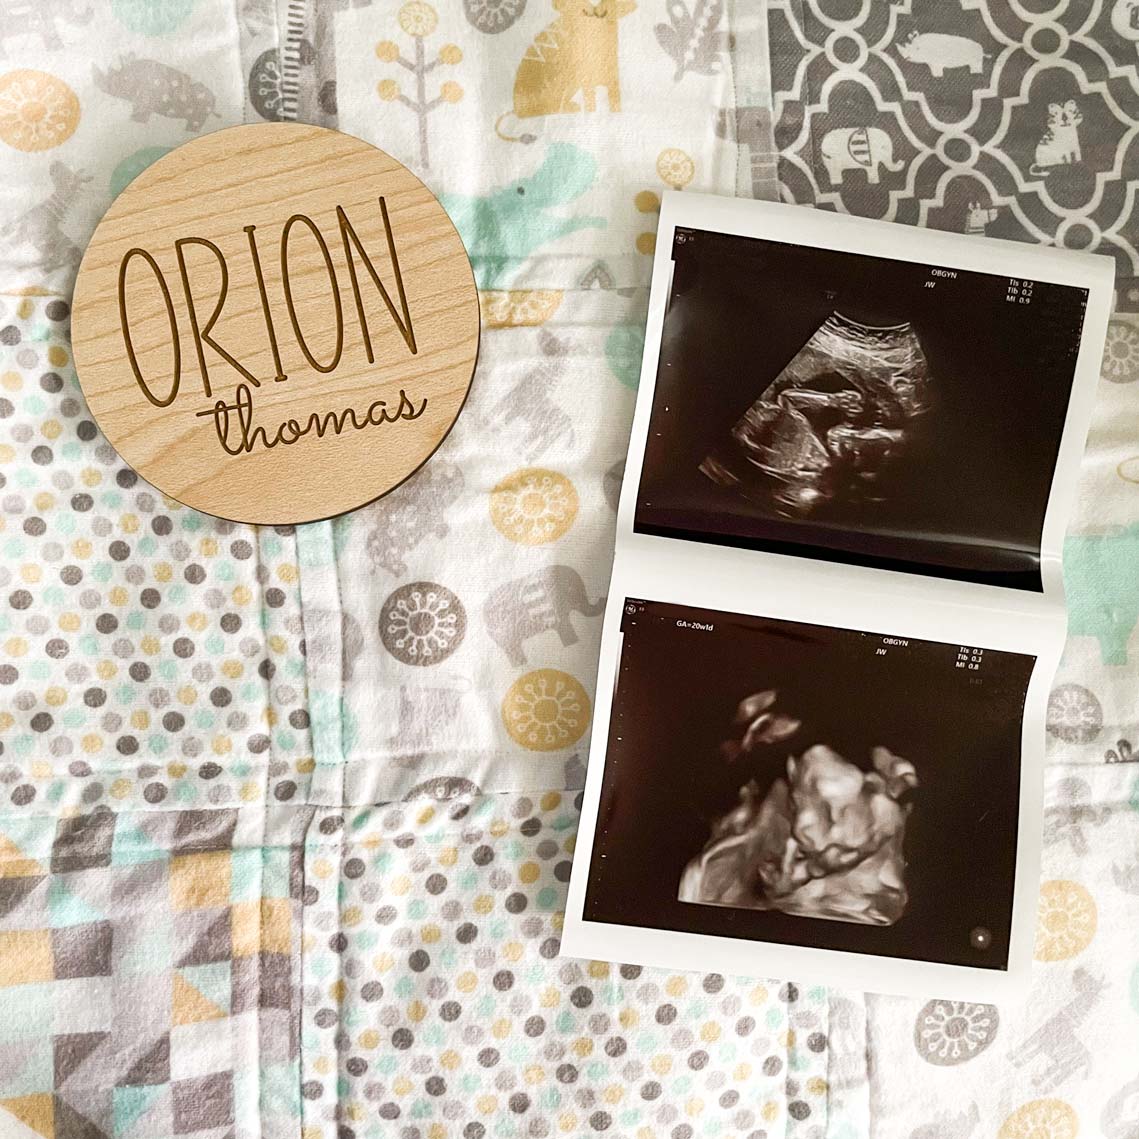 Wooden name sign read Orion Thomas, laying next two two sonogram images on baby blanket.